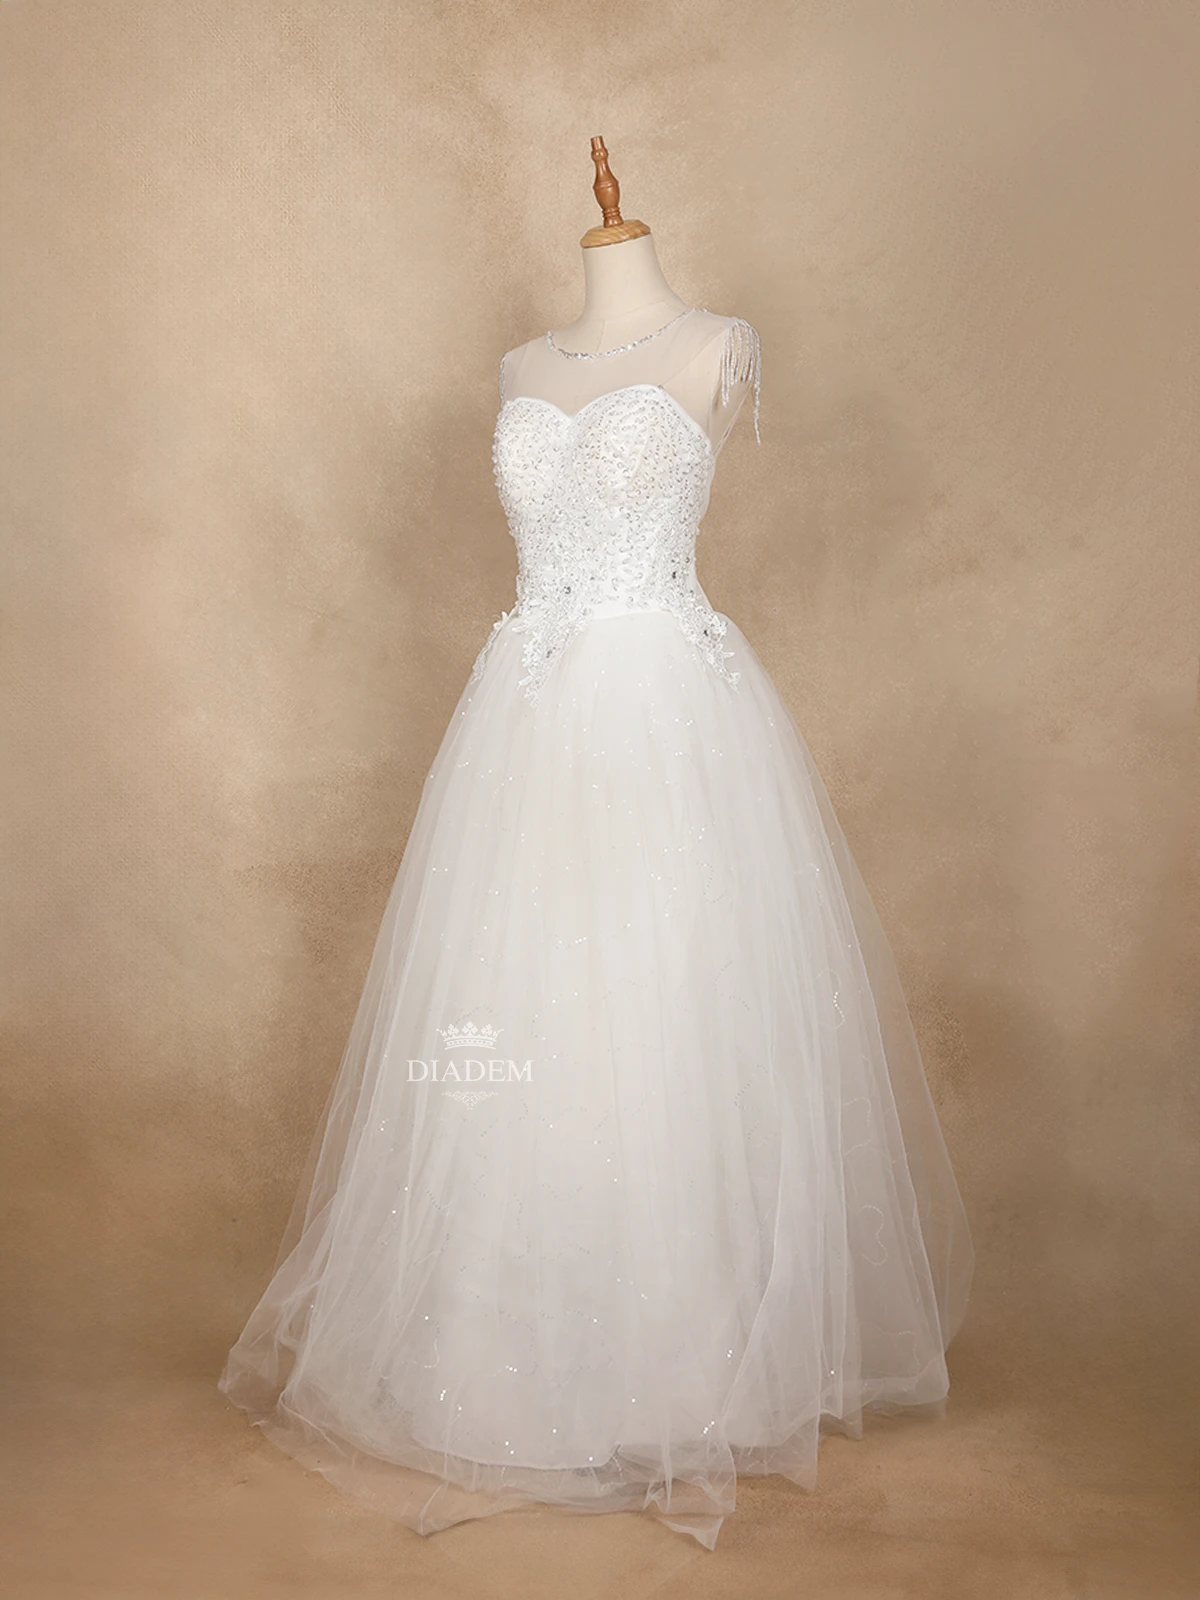 White Wedding Net Gown Adorned With Sequins And Bead Work With Beaded Tassels On Sleeve